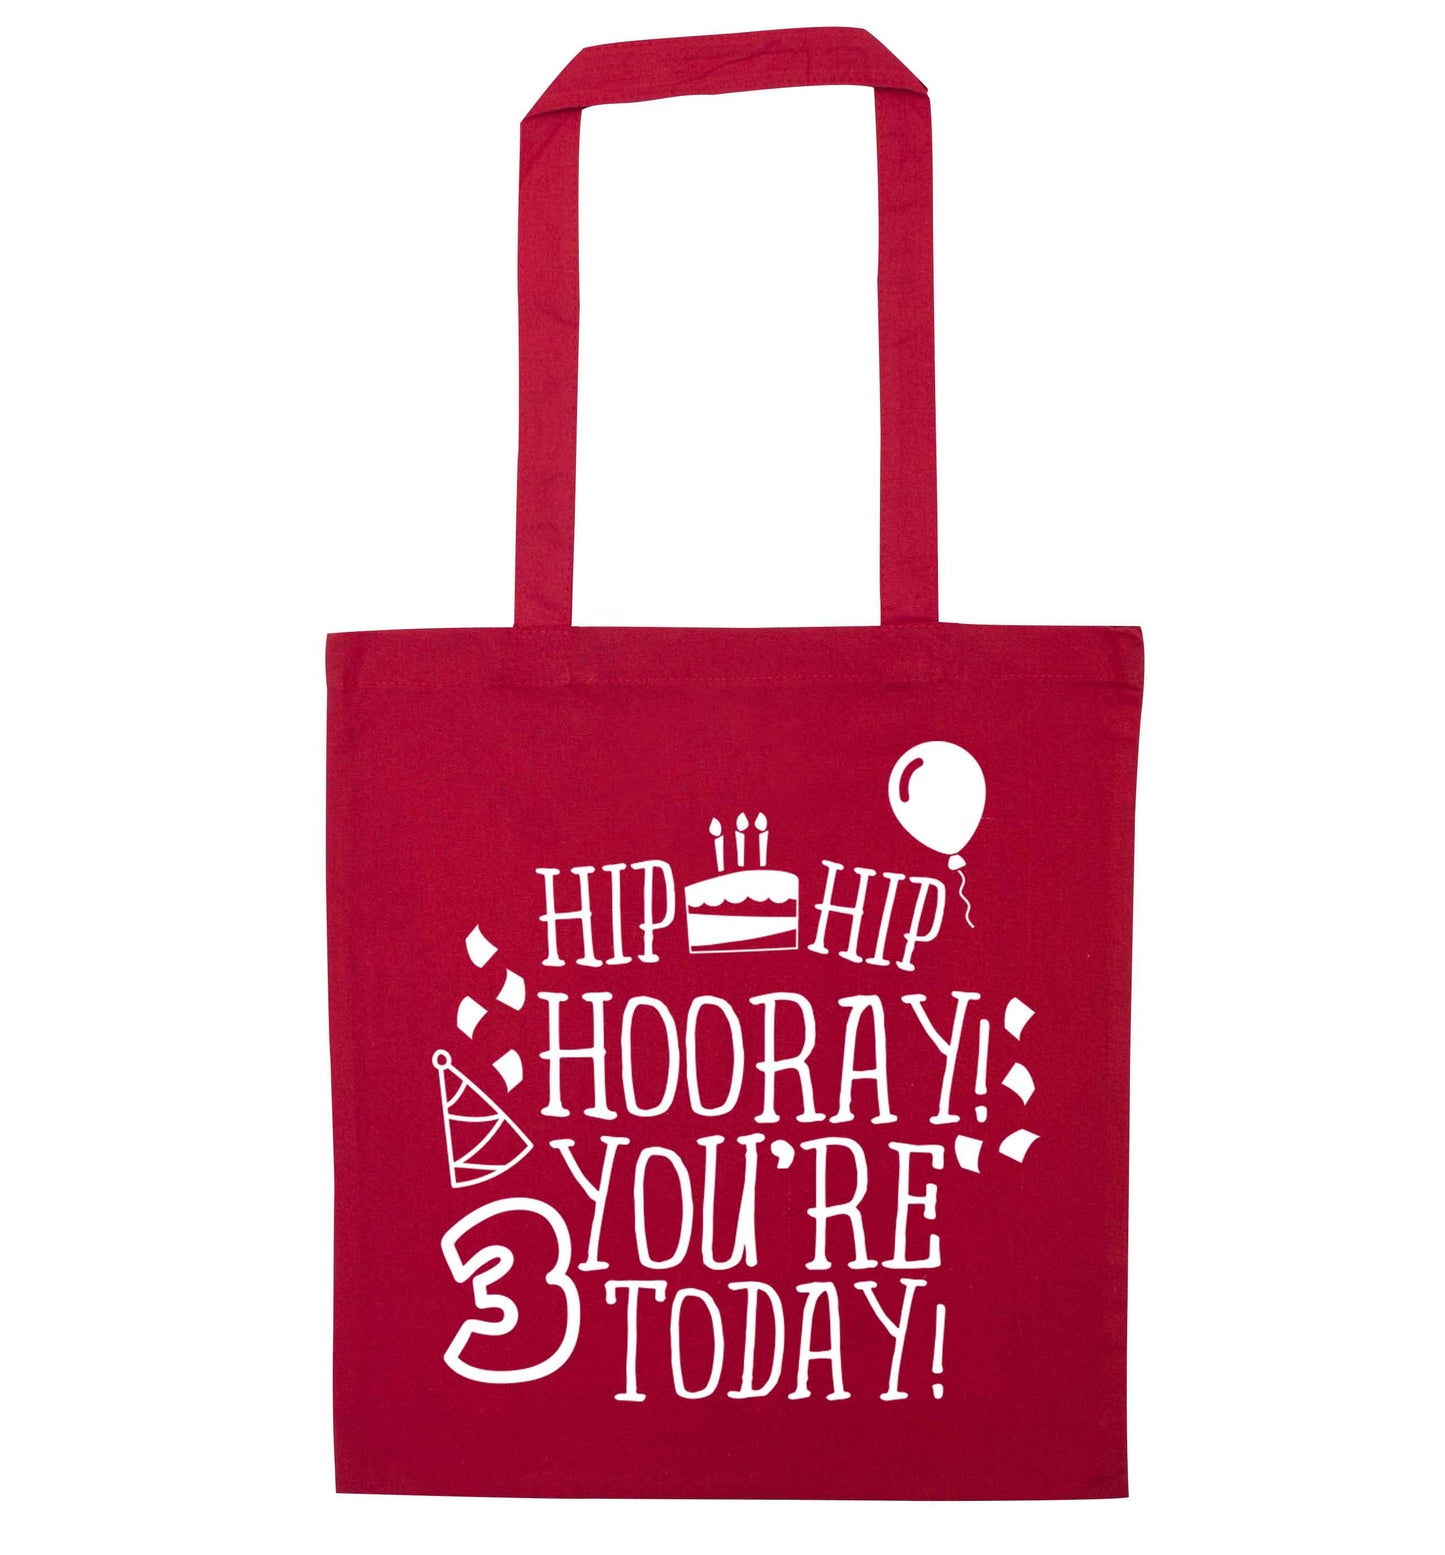 You're 3 Todayred tote bag